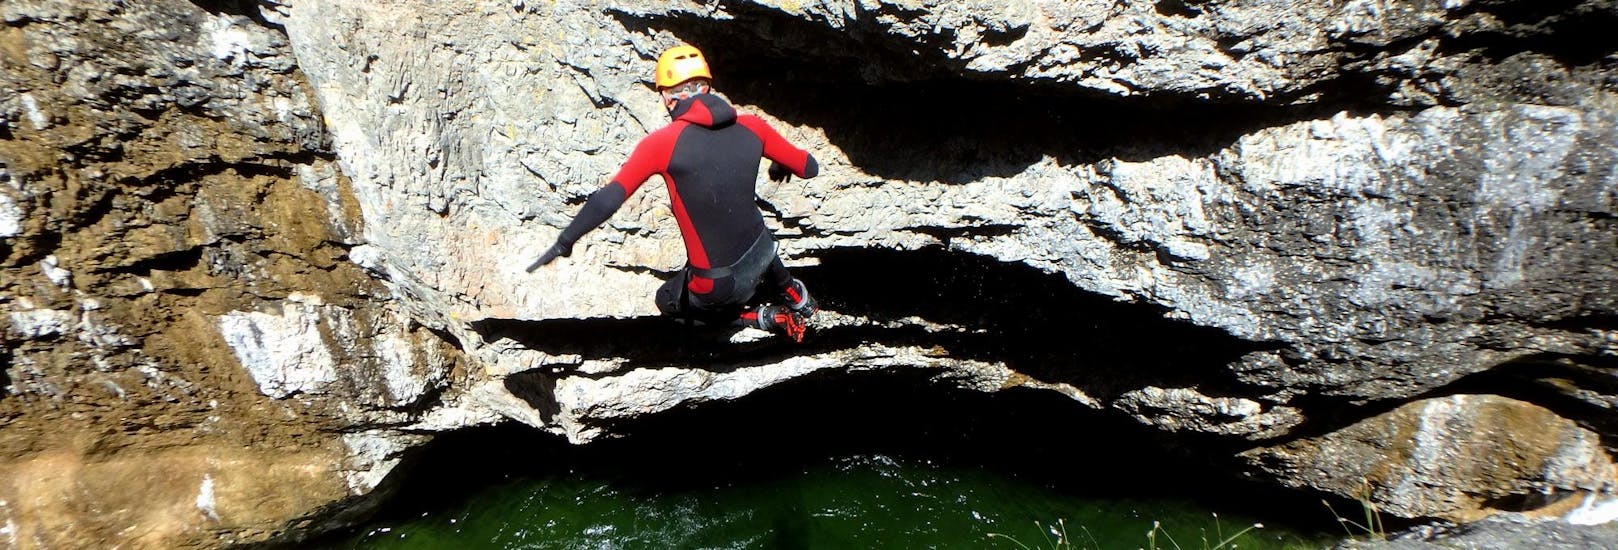 Person on a cliff at Canyoning in Strubklamm - Jumping Jack Flash Tour with Crocodile Sports Salzburg.